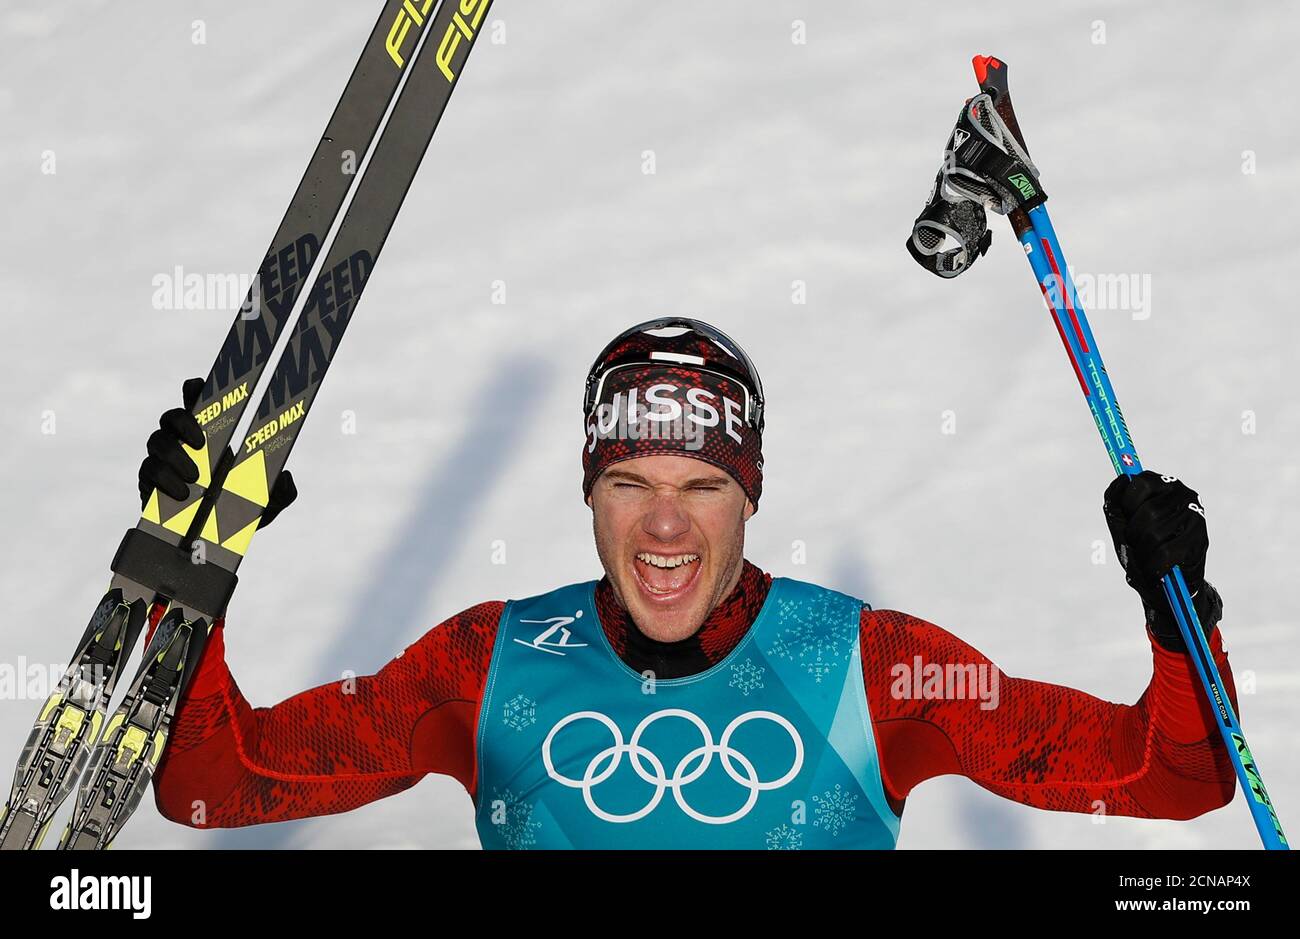 Cross-Country Skiing - Pyeongchang 2018 Winter Olympics - Men’s 15km Free - Alpensia Cross-Country Skiing Centre - Pyeongchang, South Korea - February 16, 2018 - Dario Cologna of Switzerland reacts after crossing the finish line. REUTERS/Murad Sezer Stock Photo